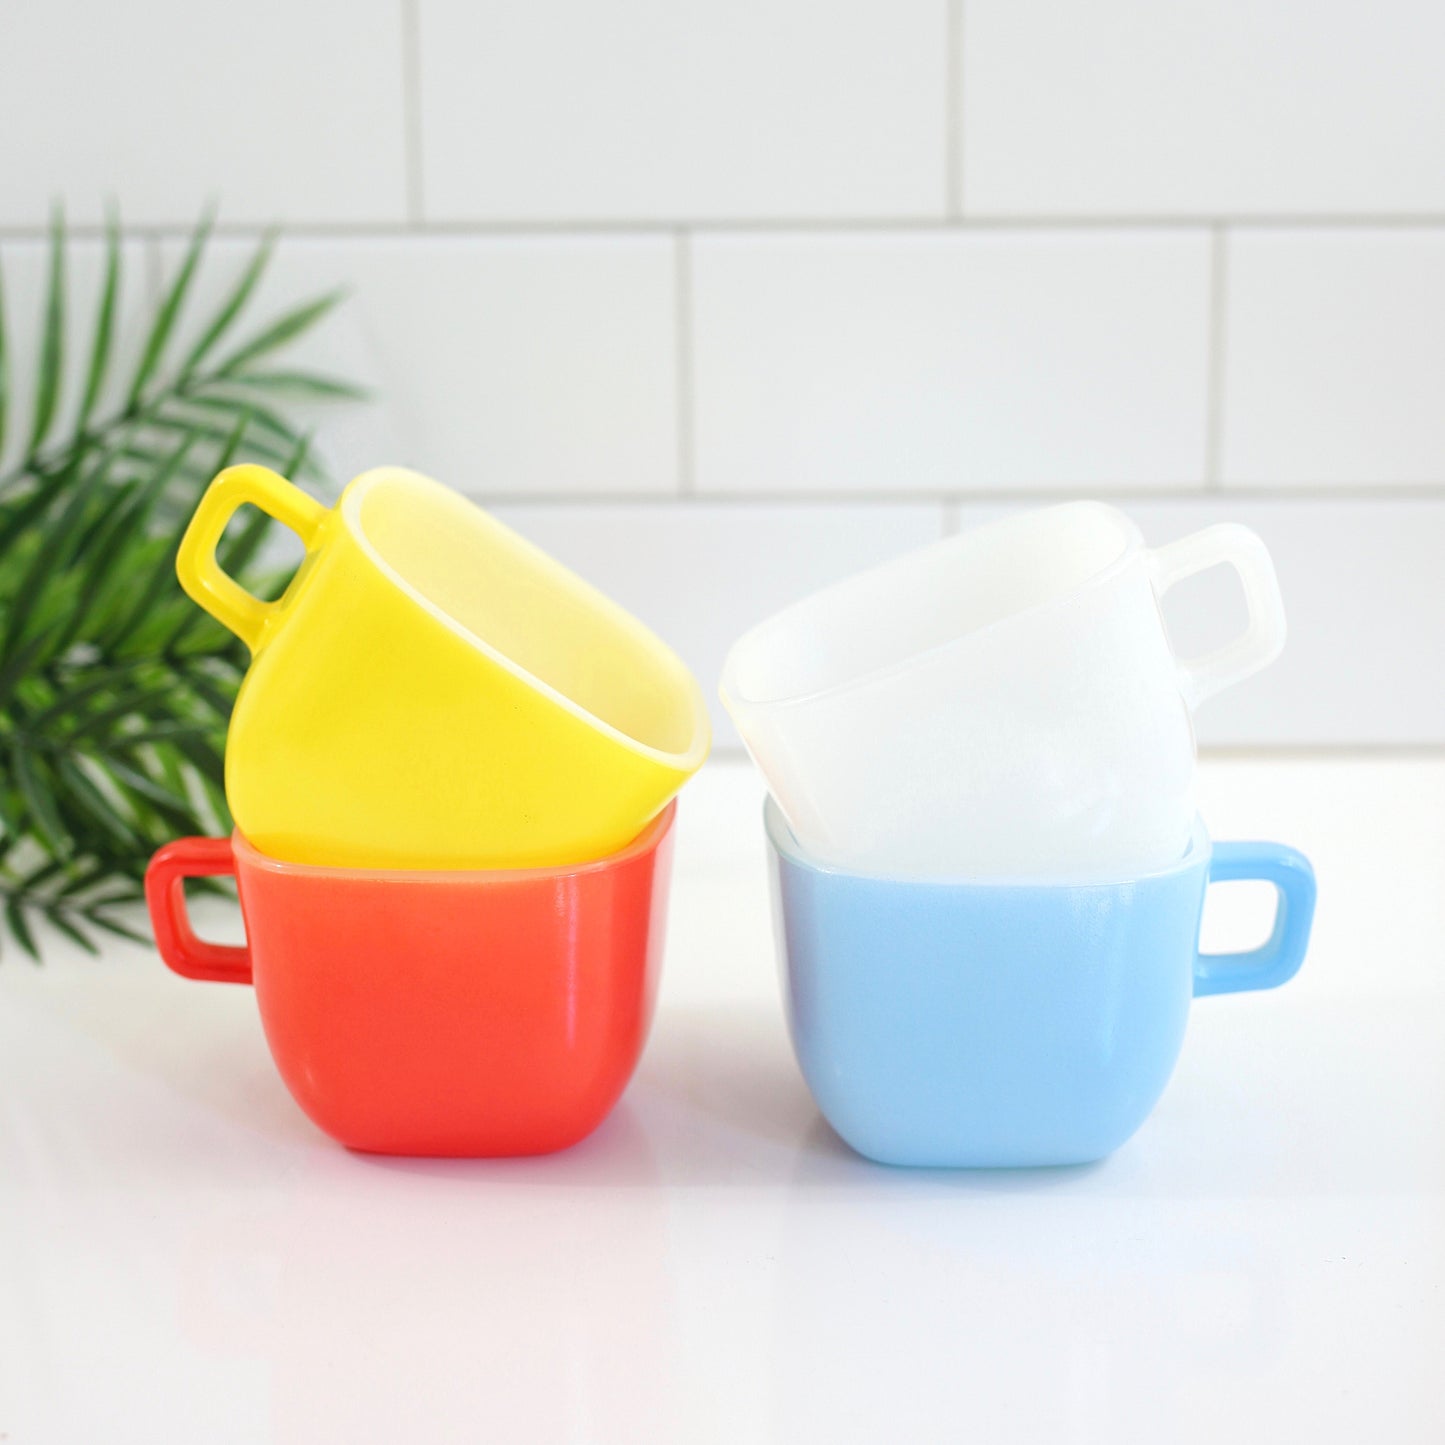 SOLD - Colorful Vintage Square Lipton Milk Glass Mugs by Glasbake